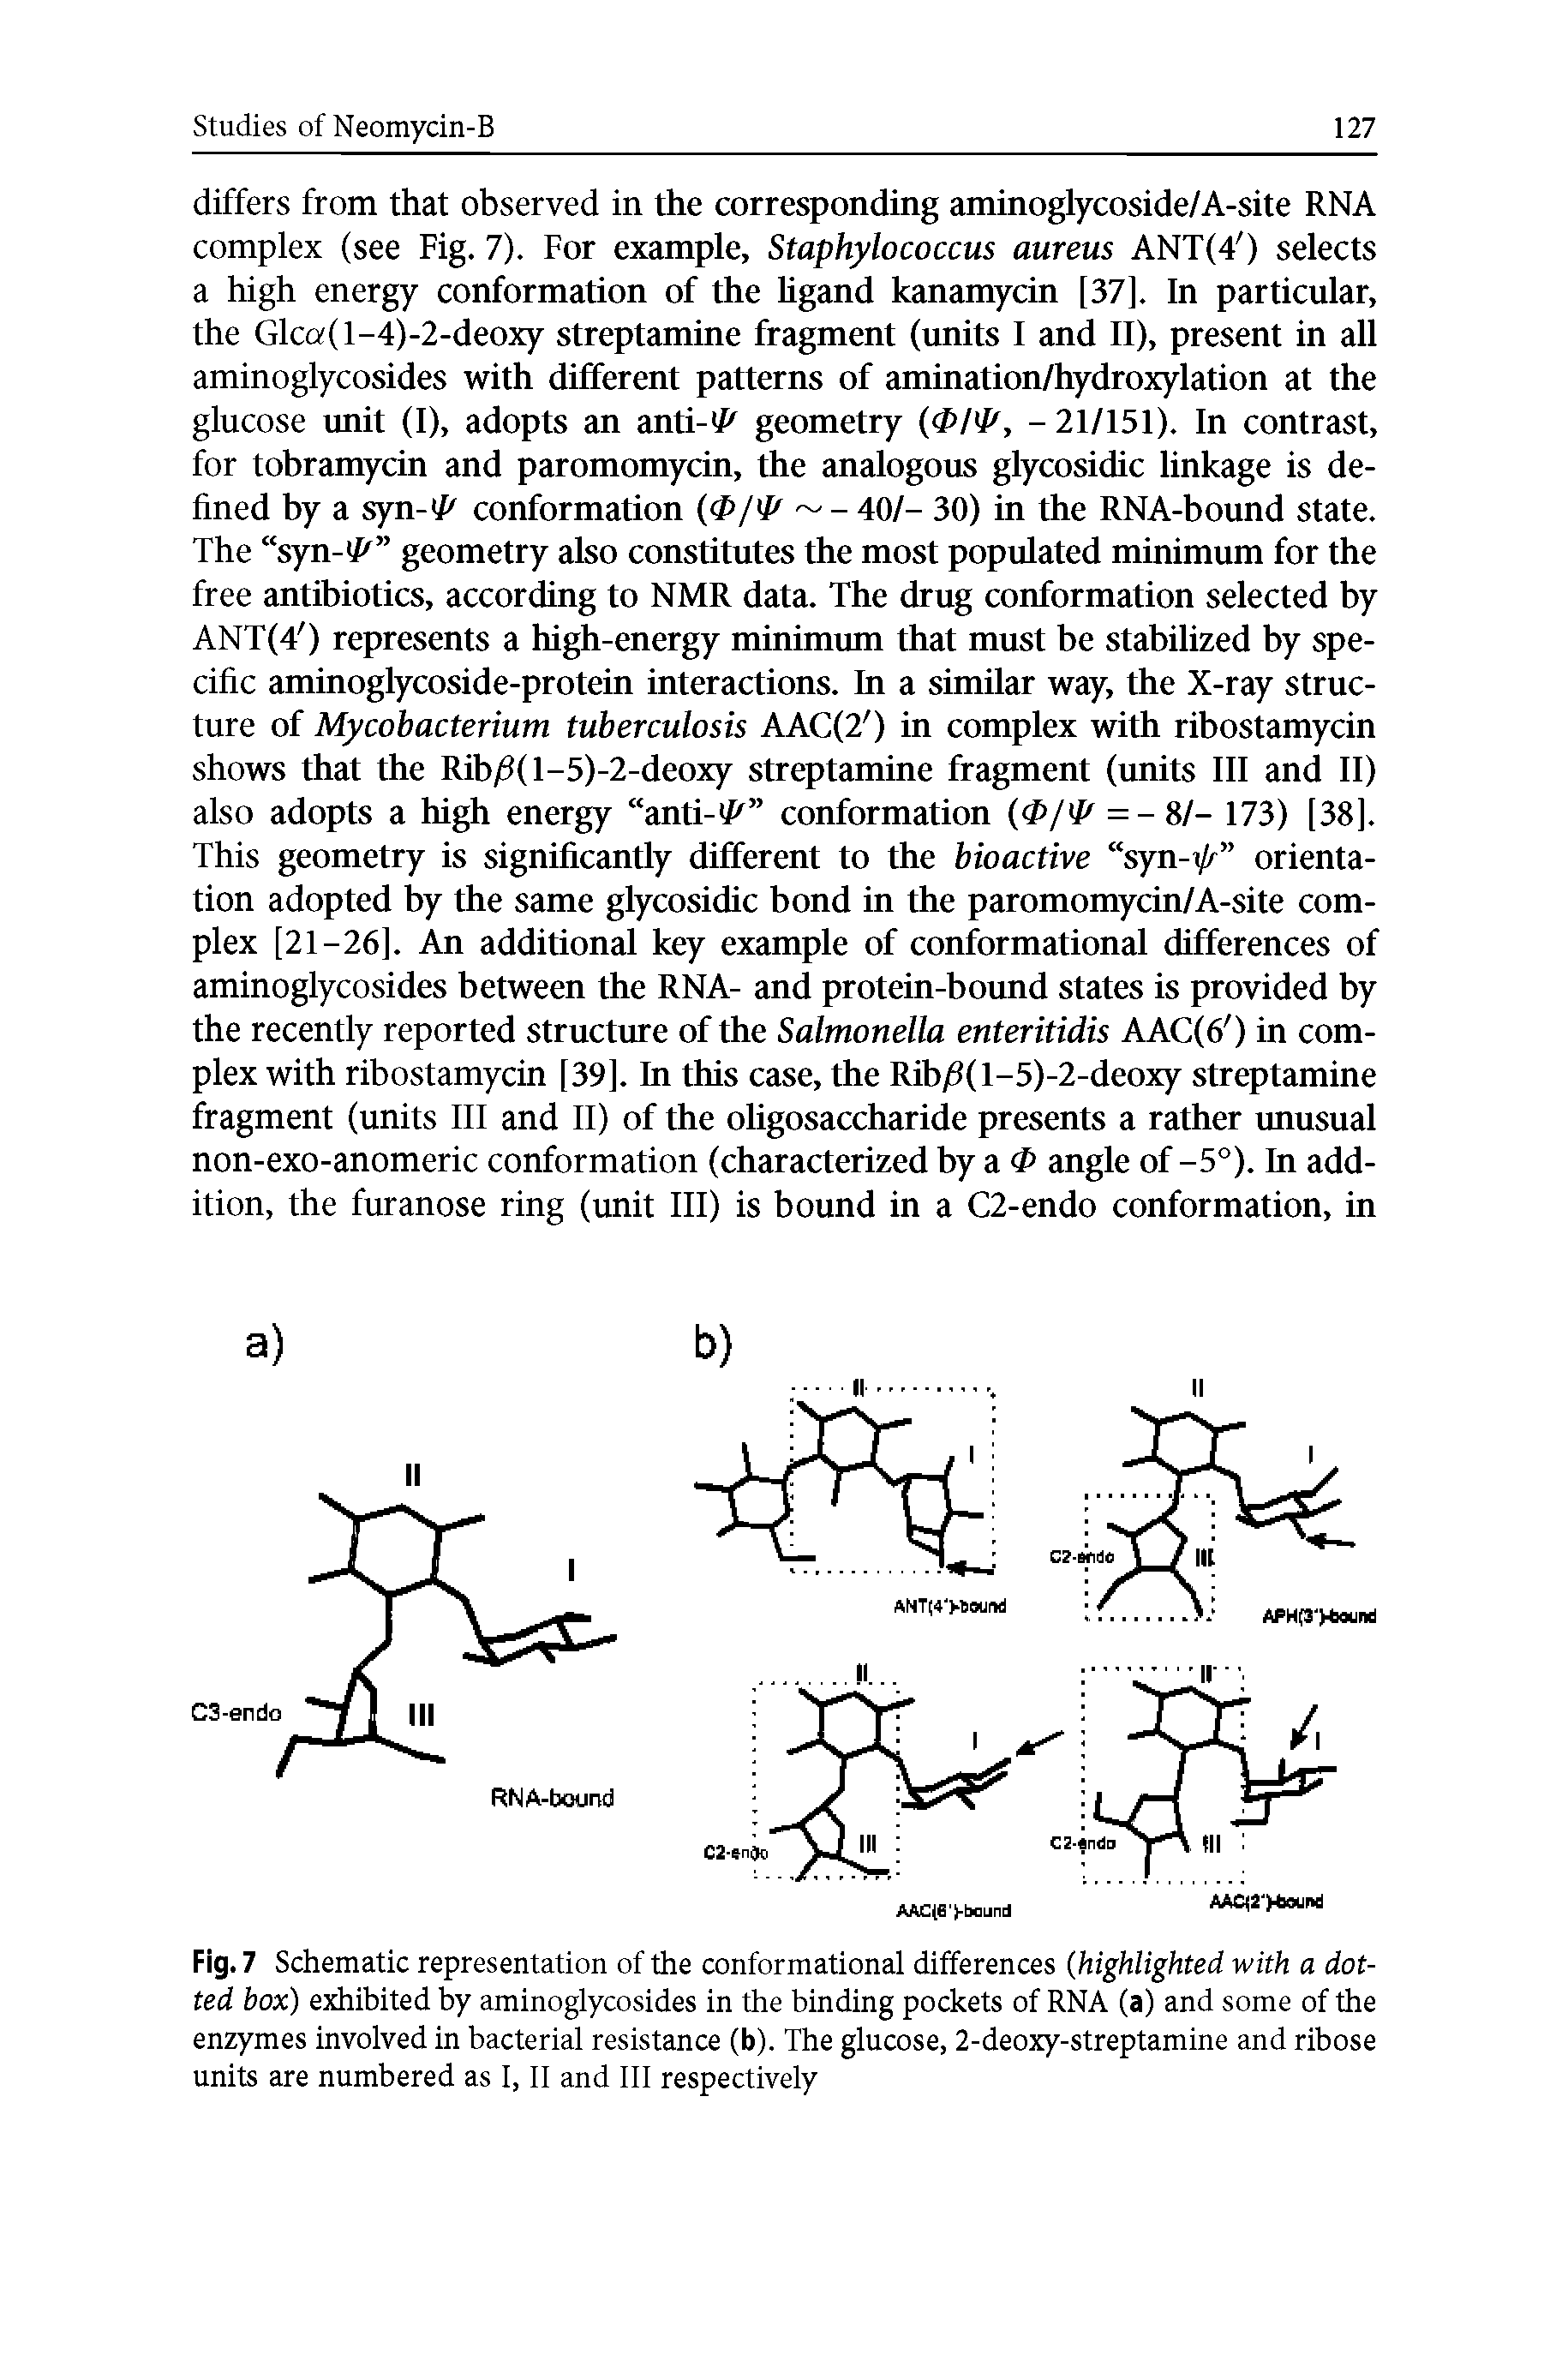 Fig. 7 Schematic representation of the conformational differences (highlighted with a dotted box) exhibited by aminoglycosides in the binding pockets of RNA (a) and some of the enzymes involved in bacterial resistance (b). The glucose, 2-deoxy-streptamine and ribose units are numbered as I, II and III respectively...